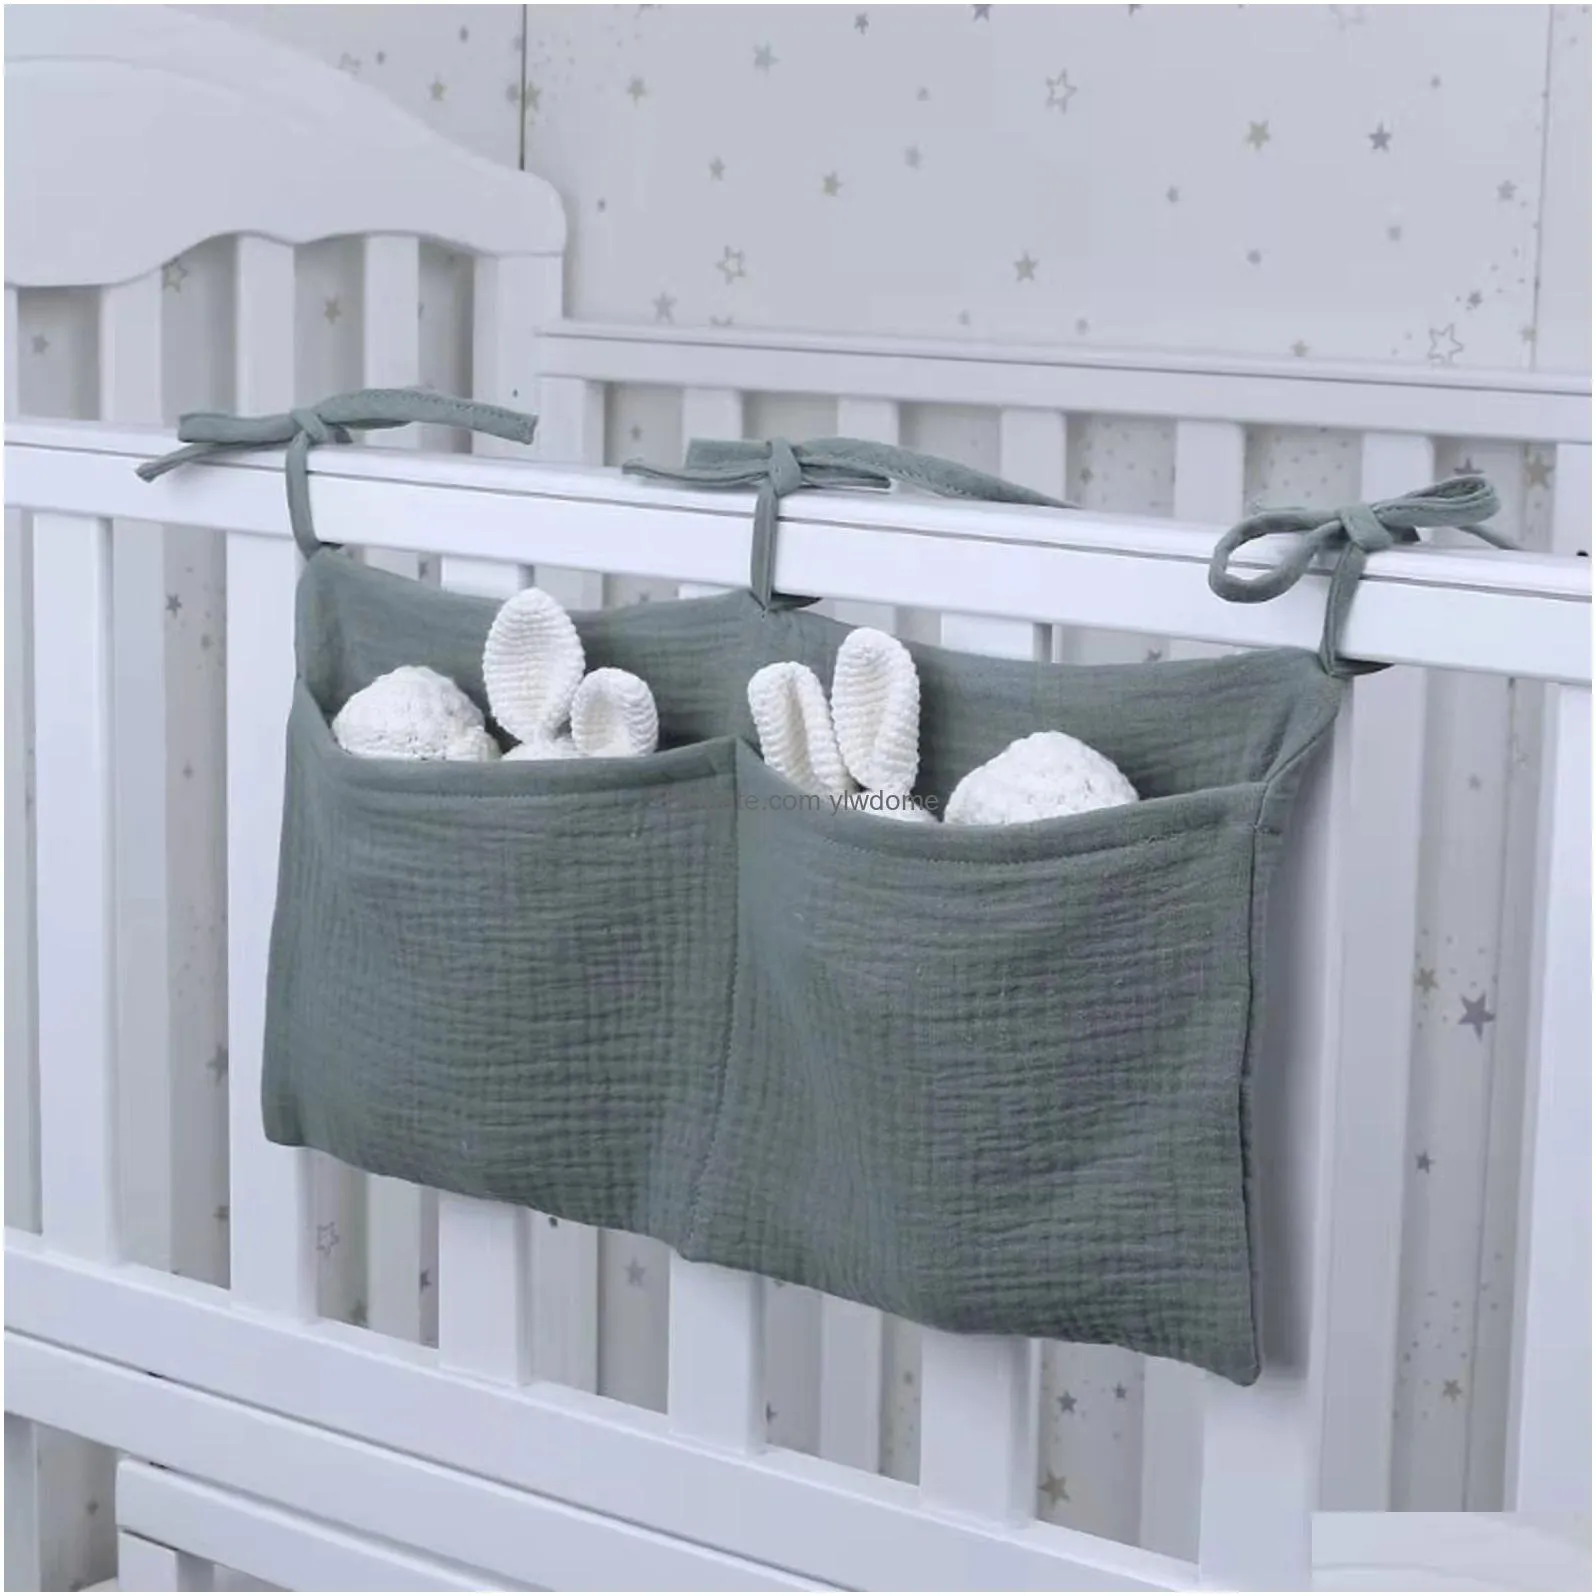 Diaper Bags Portable Baby Crib Storage Bag Nappy Organizer Mtifunctional Newborn Bed Headboard For Kids Items Bedding Drop Delivery Ba Dh6F2